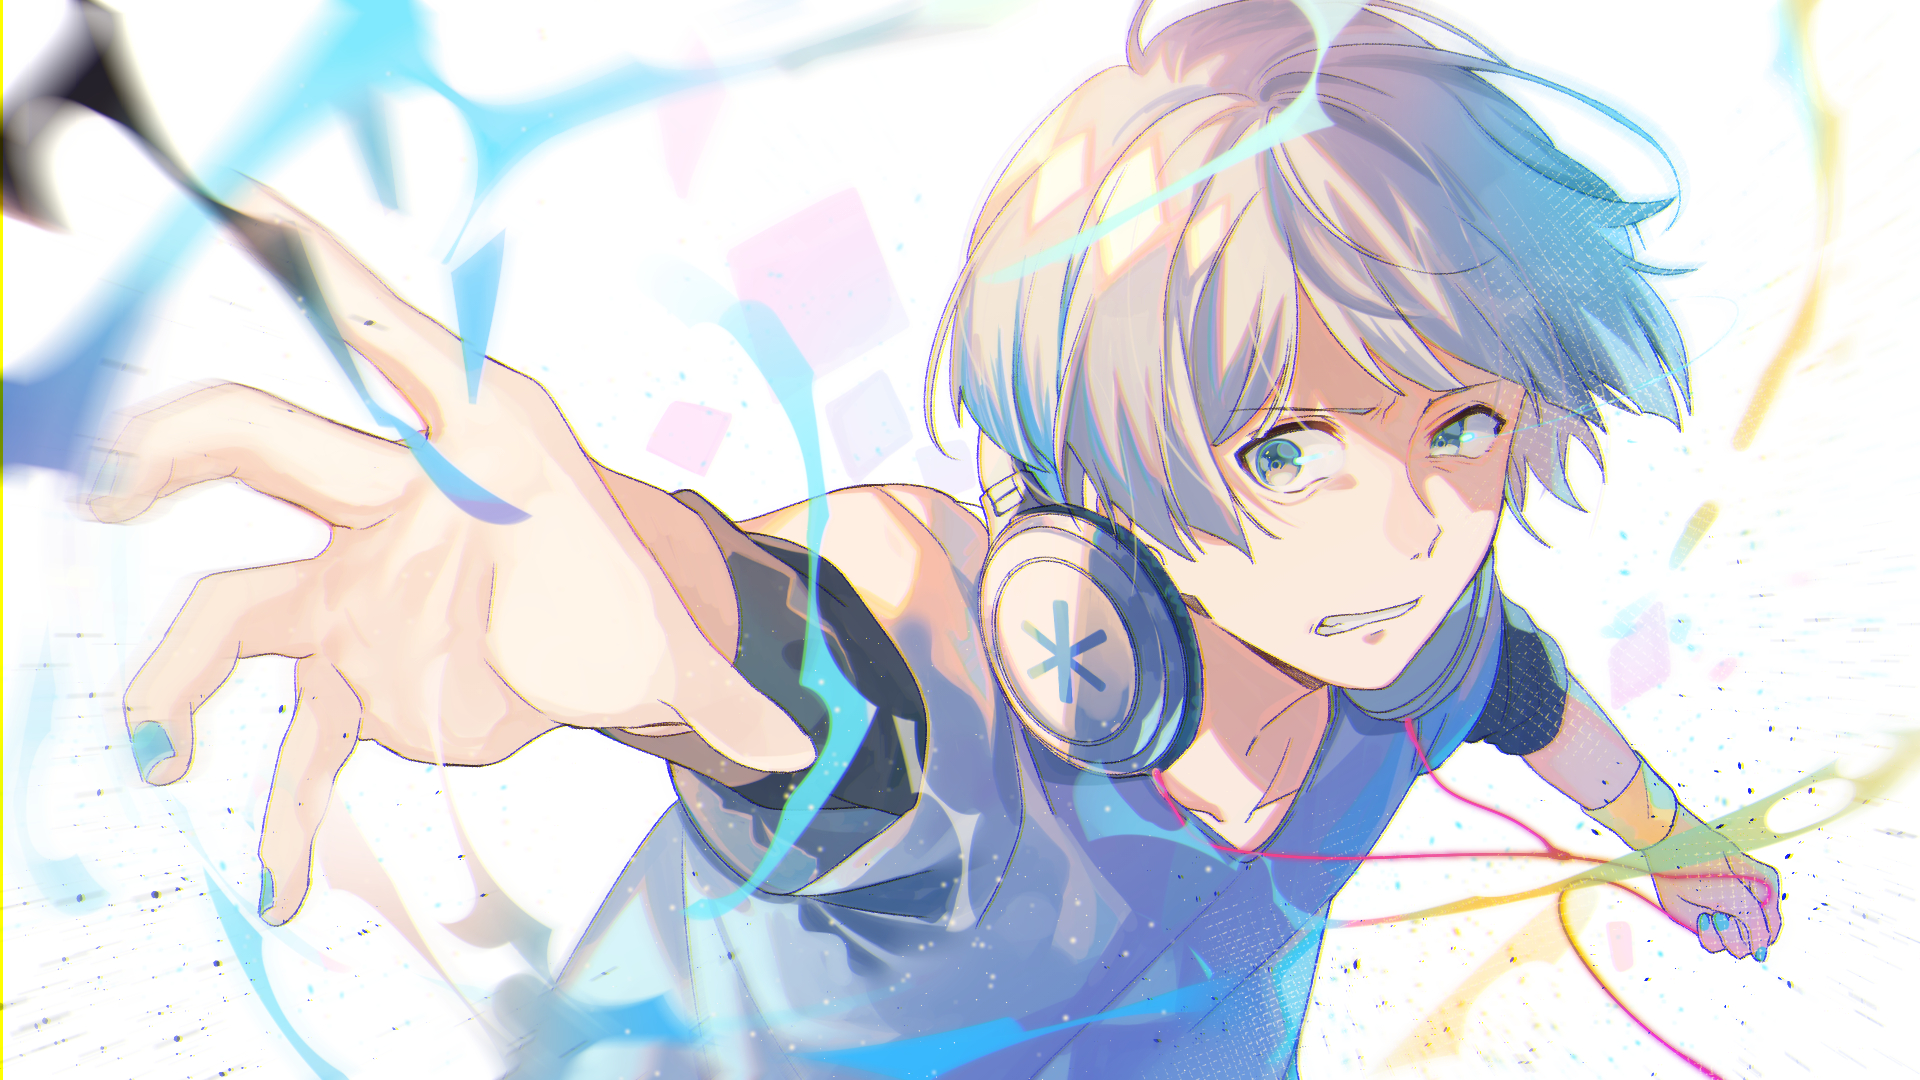 Anime boy with headphones and blue hair - wide 3